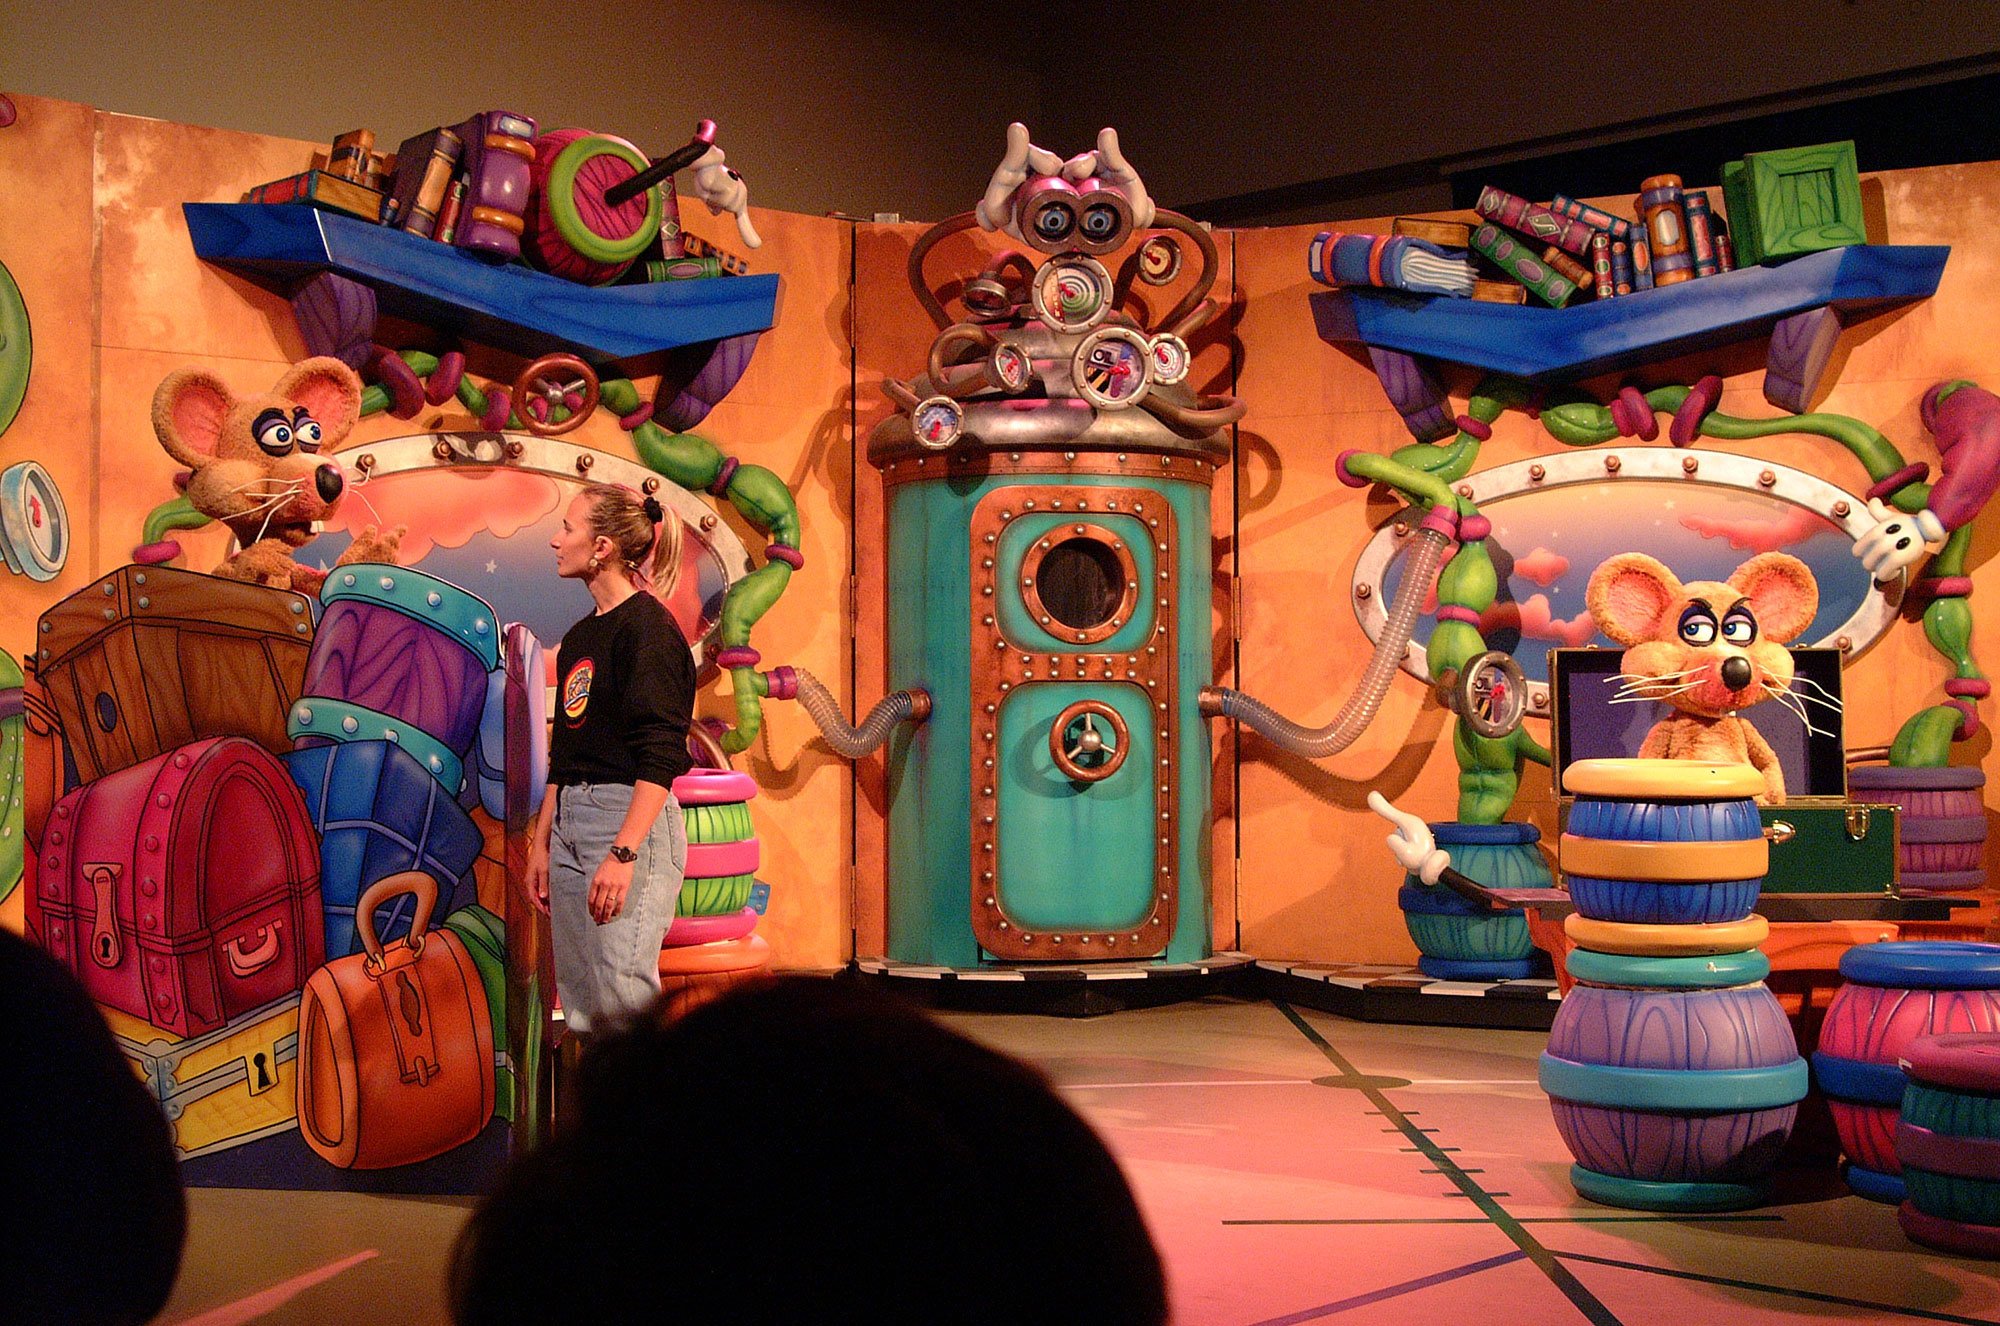 Woman on a Wacky Stage with Animatronic Characters, 3D props, bookshelves, books, pipes and other characters